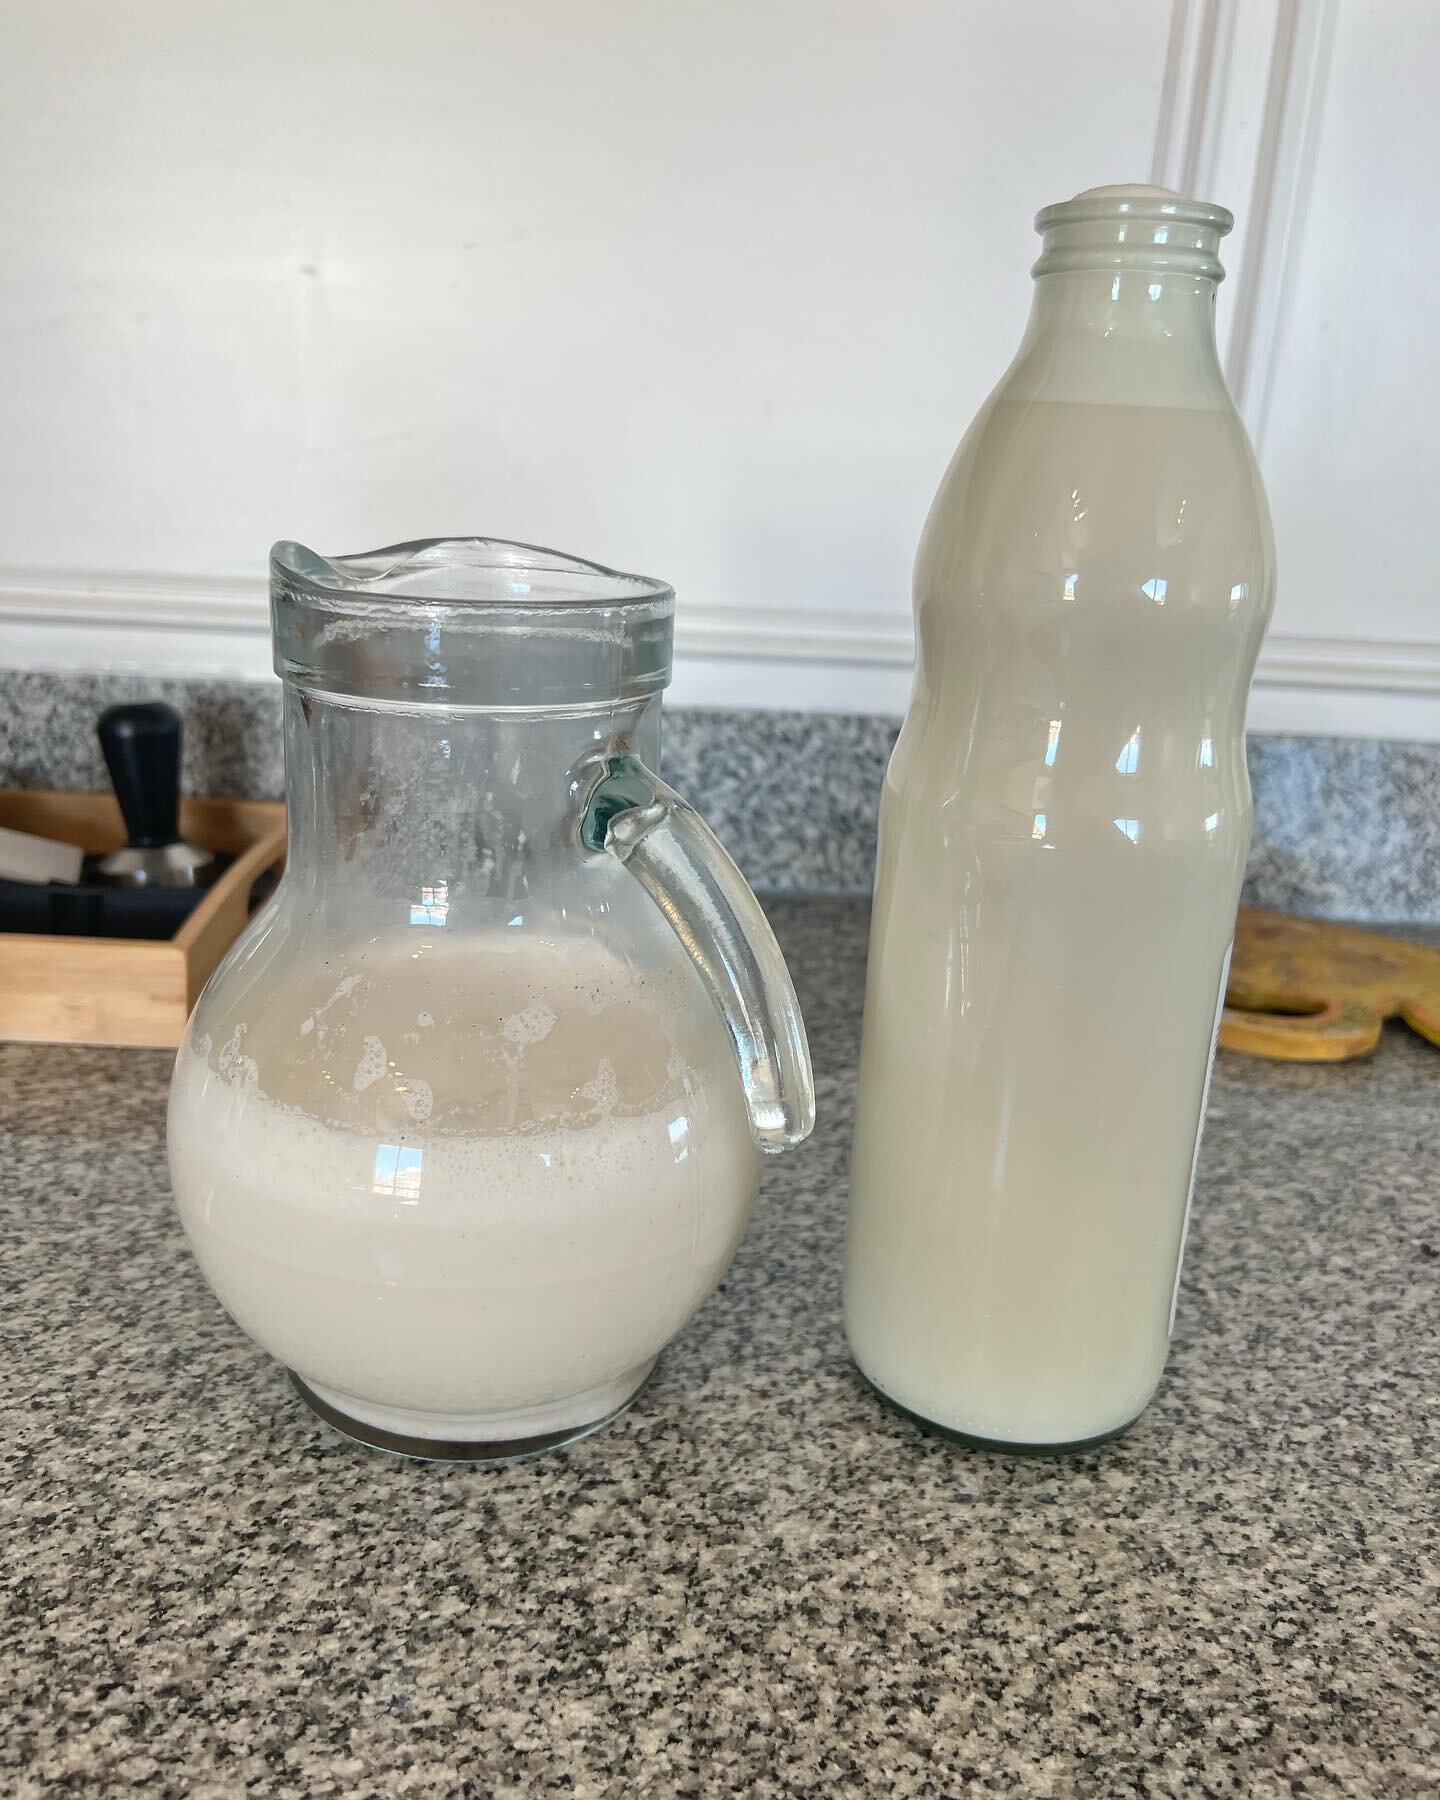 Fist time making and trying oat milk. It is so easy to make and unlike almond milk you don&rsquo;t need to soak them. So great for making last minute. What you&rsquo;ll need is:
✨1 cup oats (gf if possible)
✨6 cups cold filtered water
✨Dash of sea sa